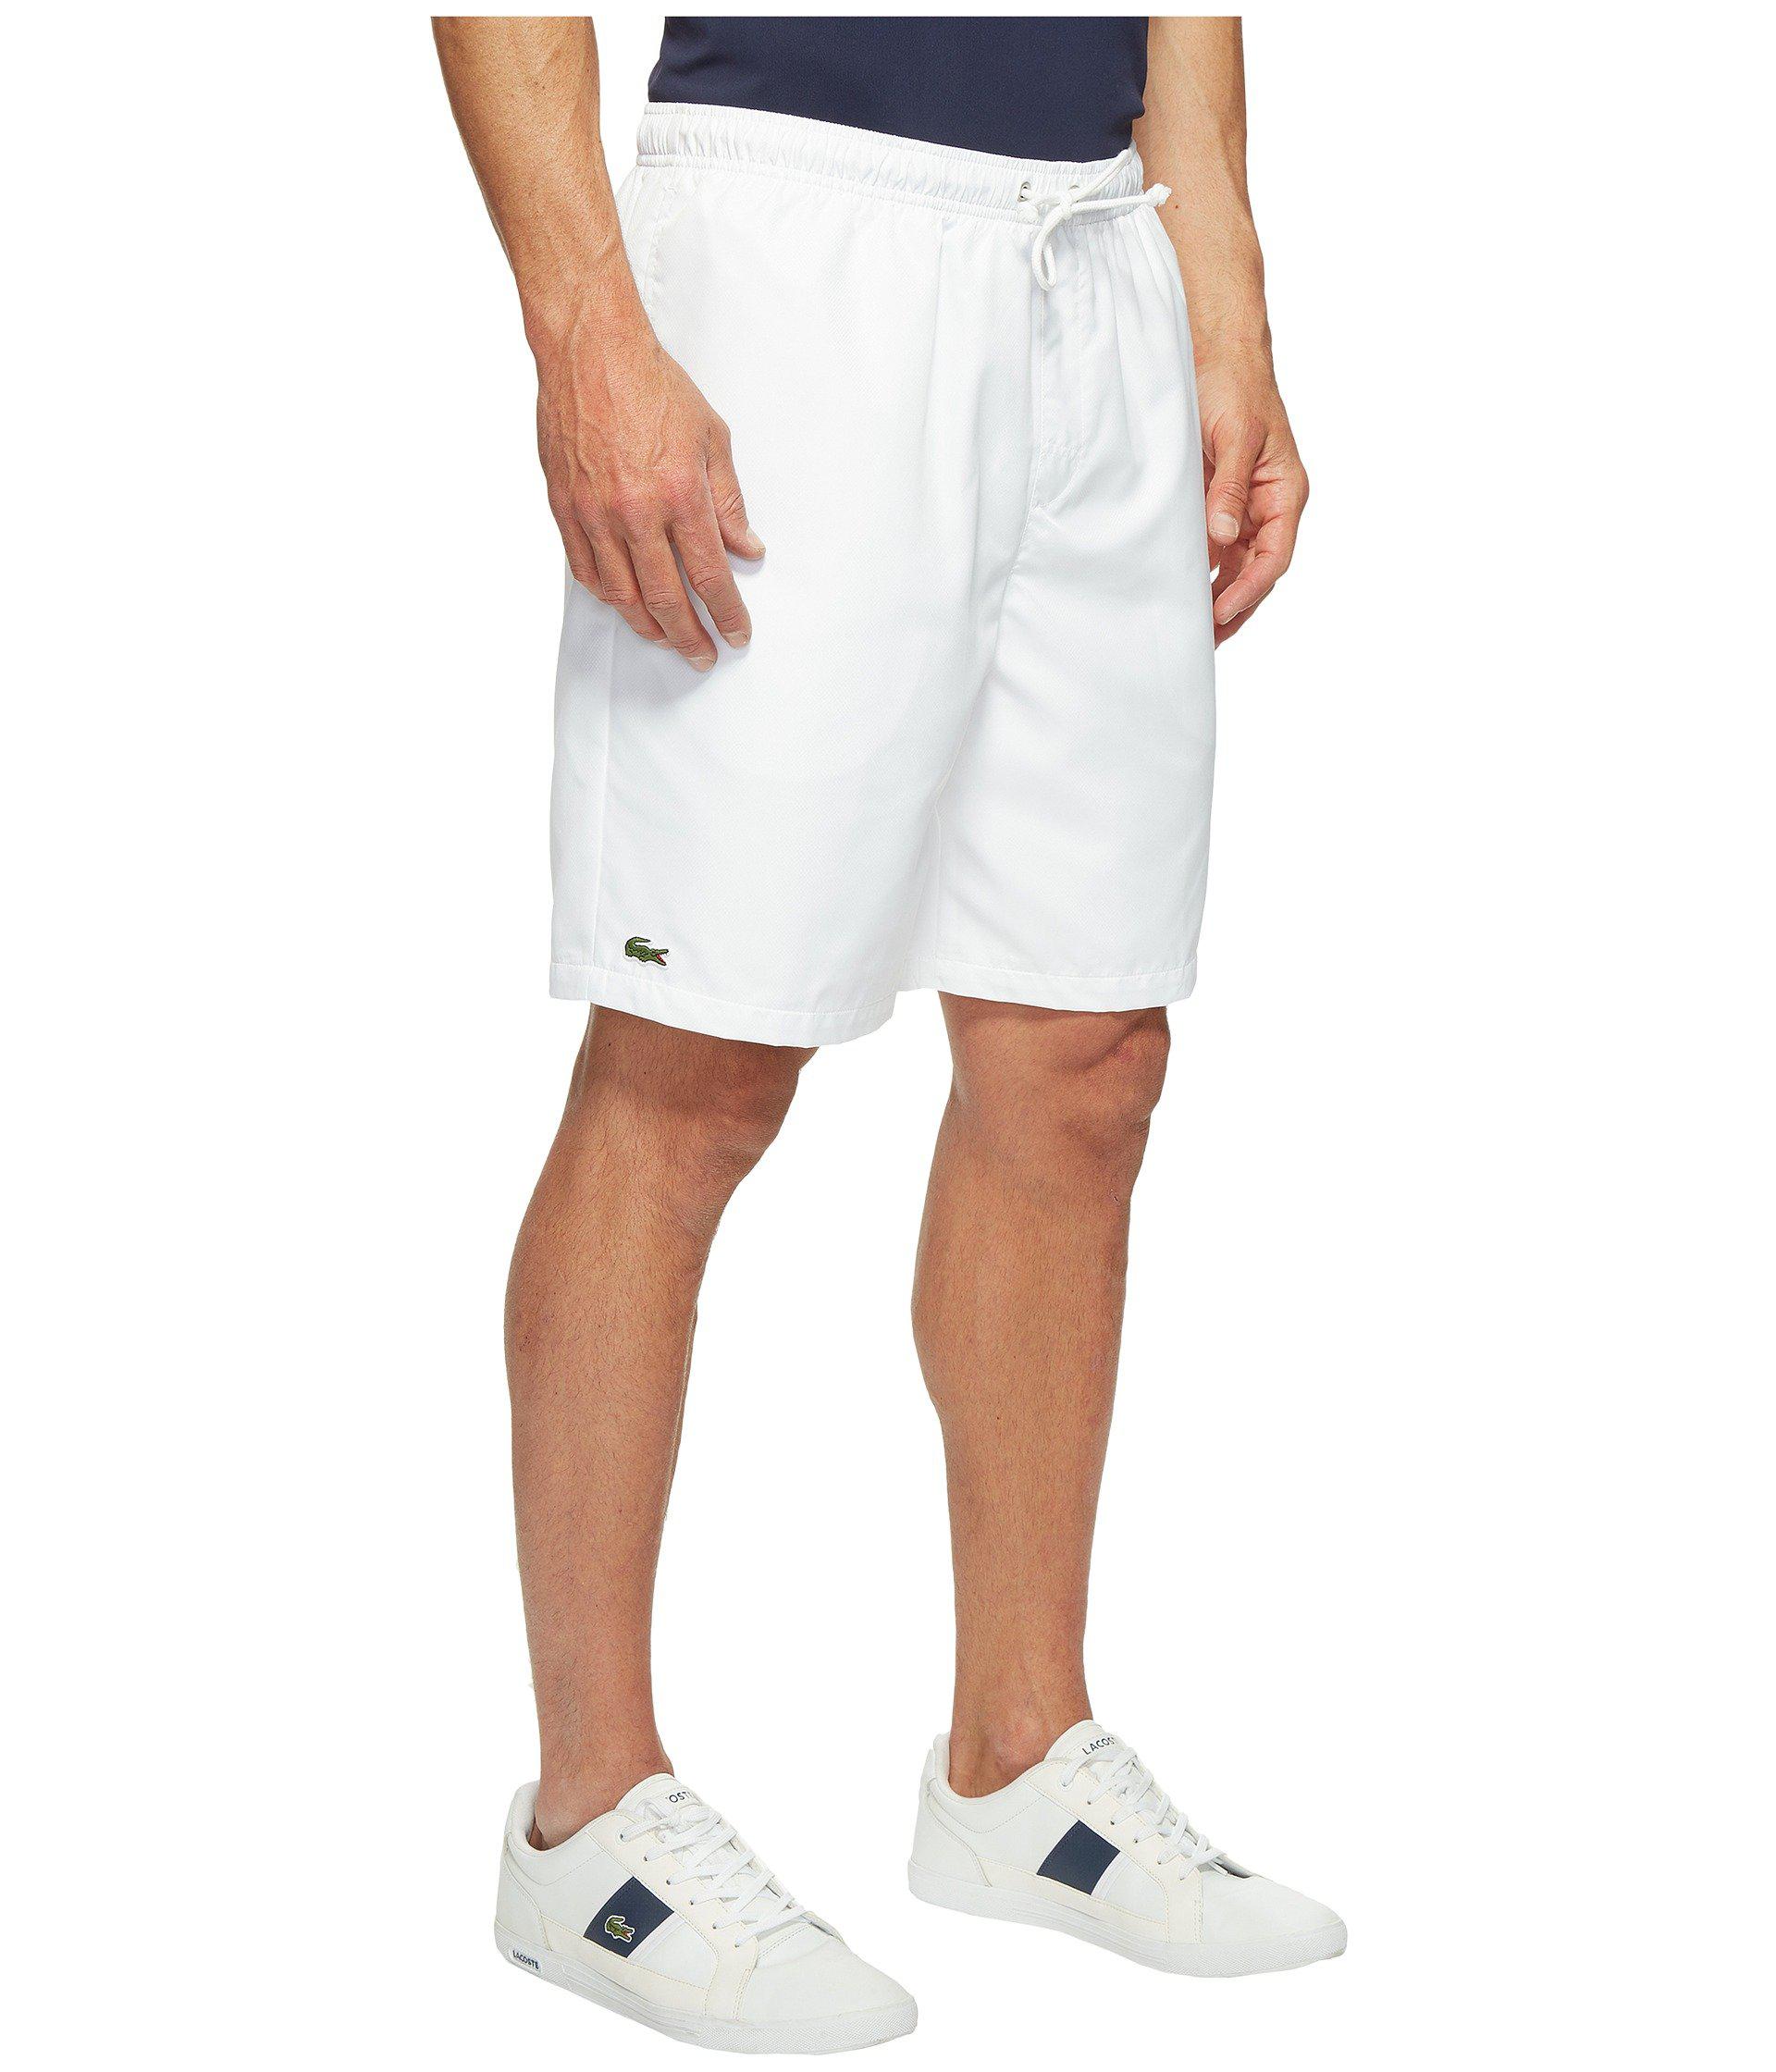 Lyst - Lacoste Sport Lined Tennis Shorts in White for Men